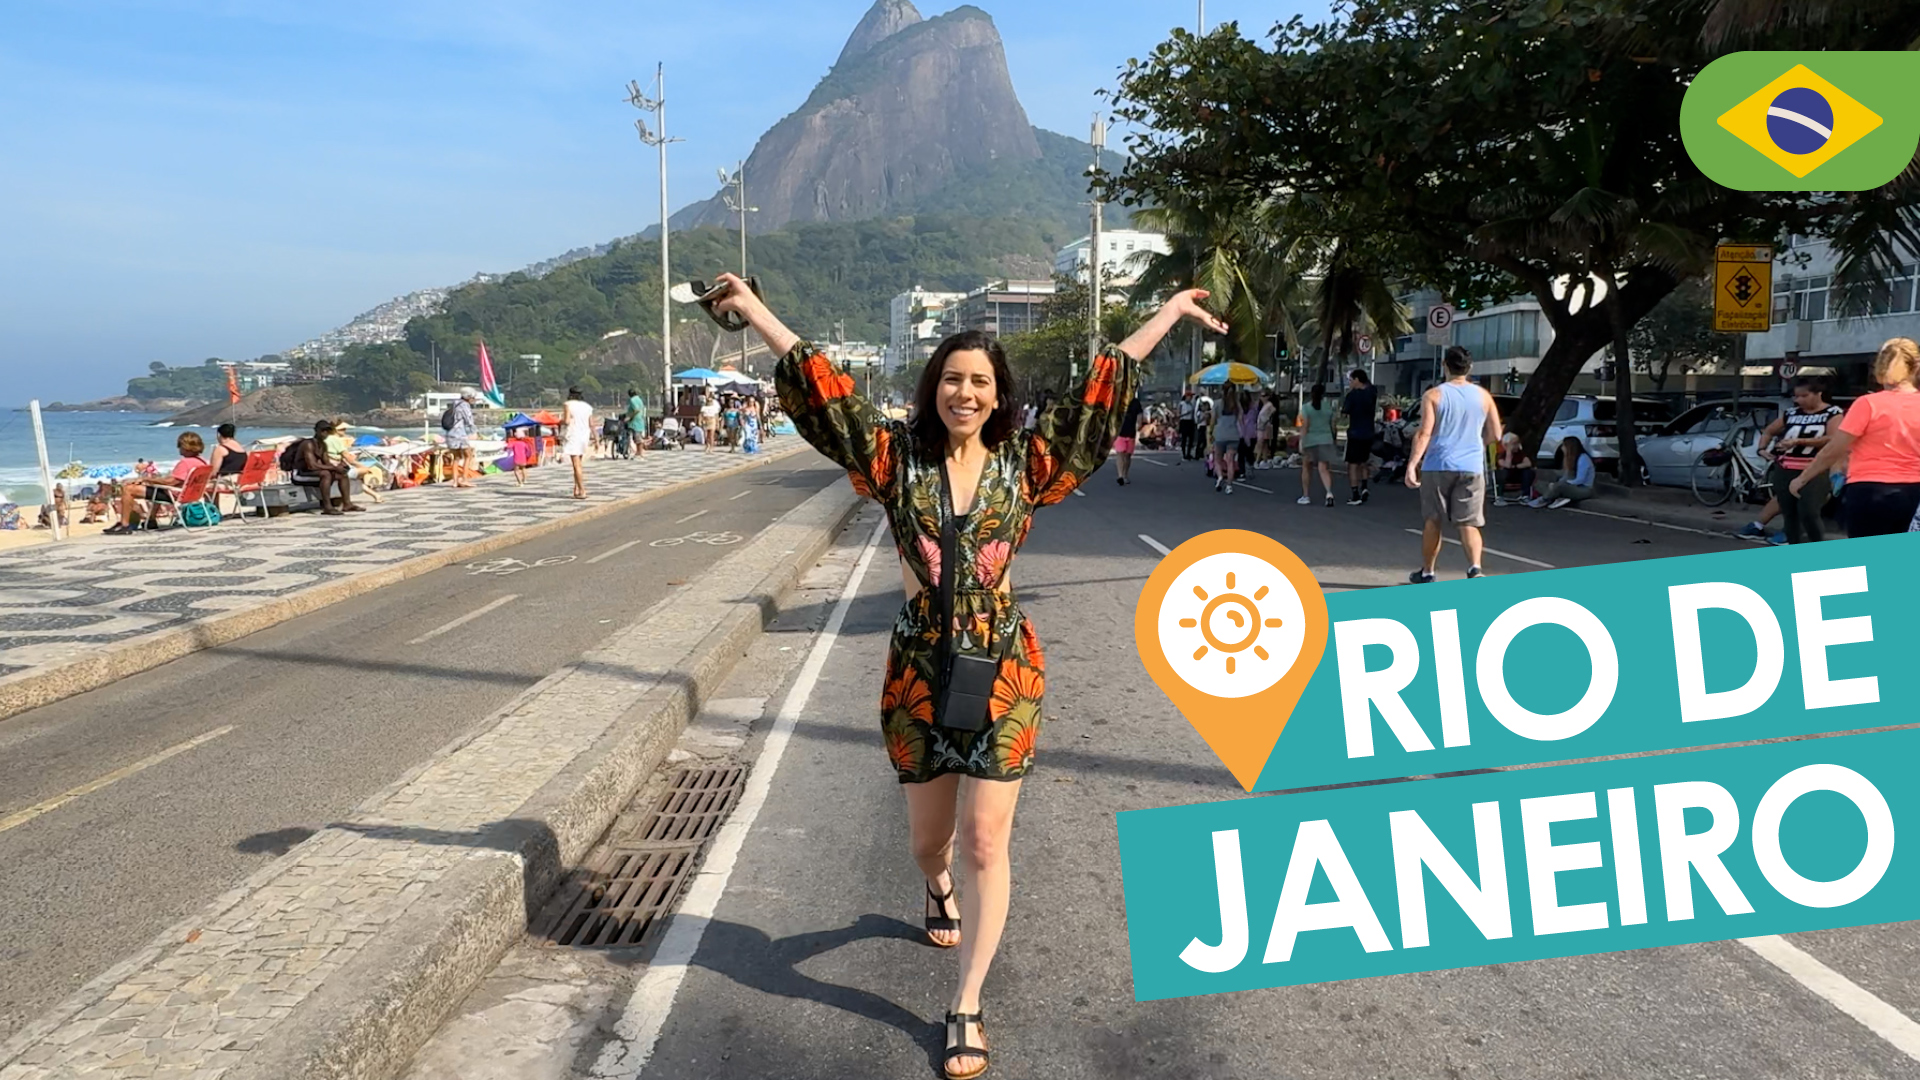 The most famous places in Rio de Janeiro